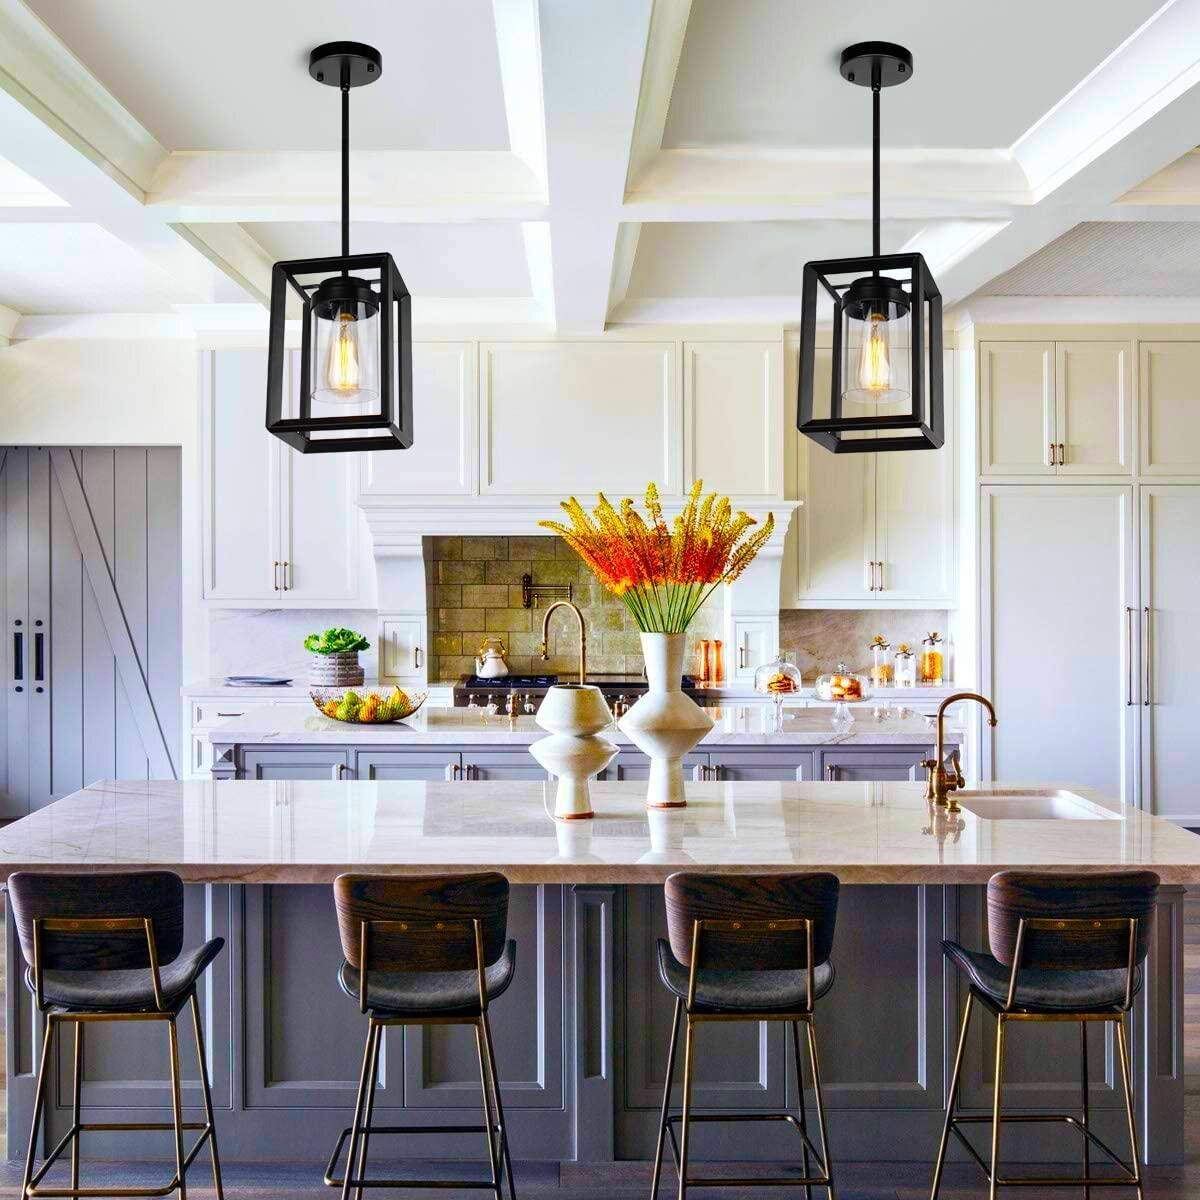 PENDANT CLEAR GLASS SHADE LIVING DINING ROOM KITCHEN ISLAND CHANDELIER 1 LIGHT 